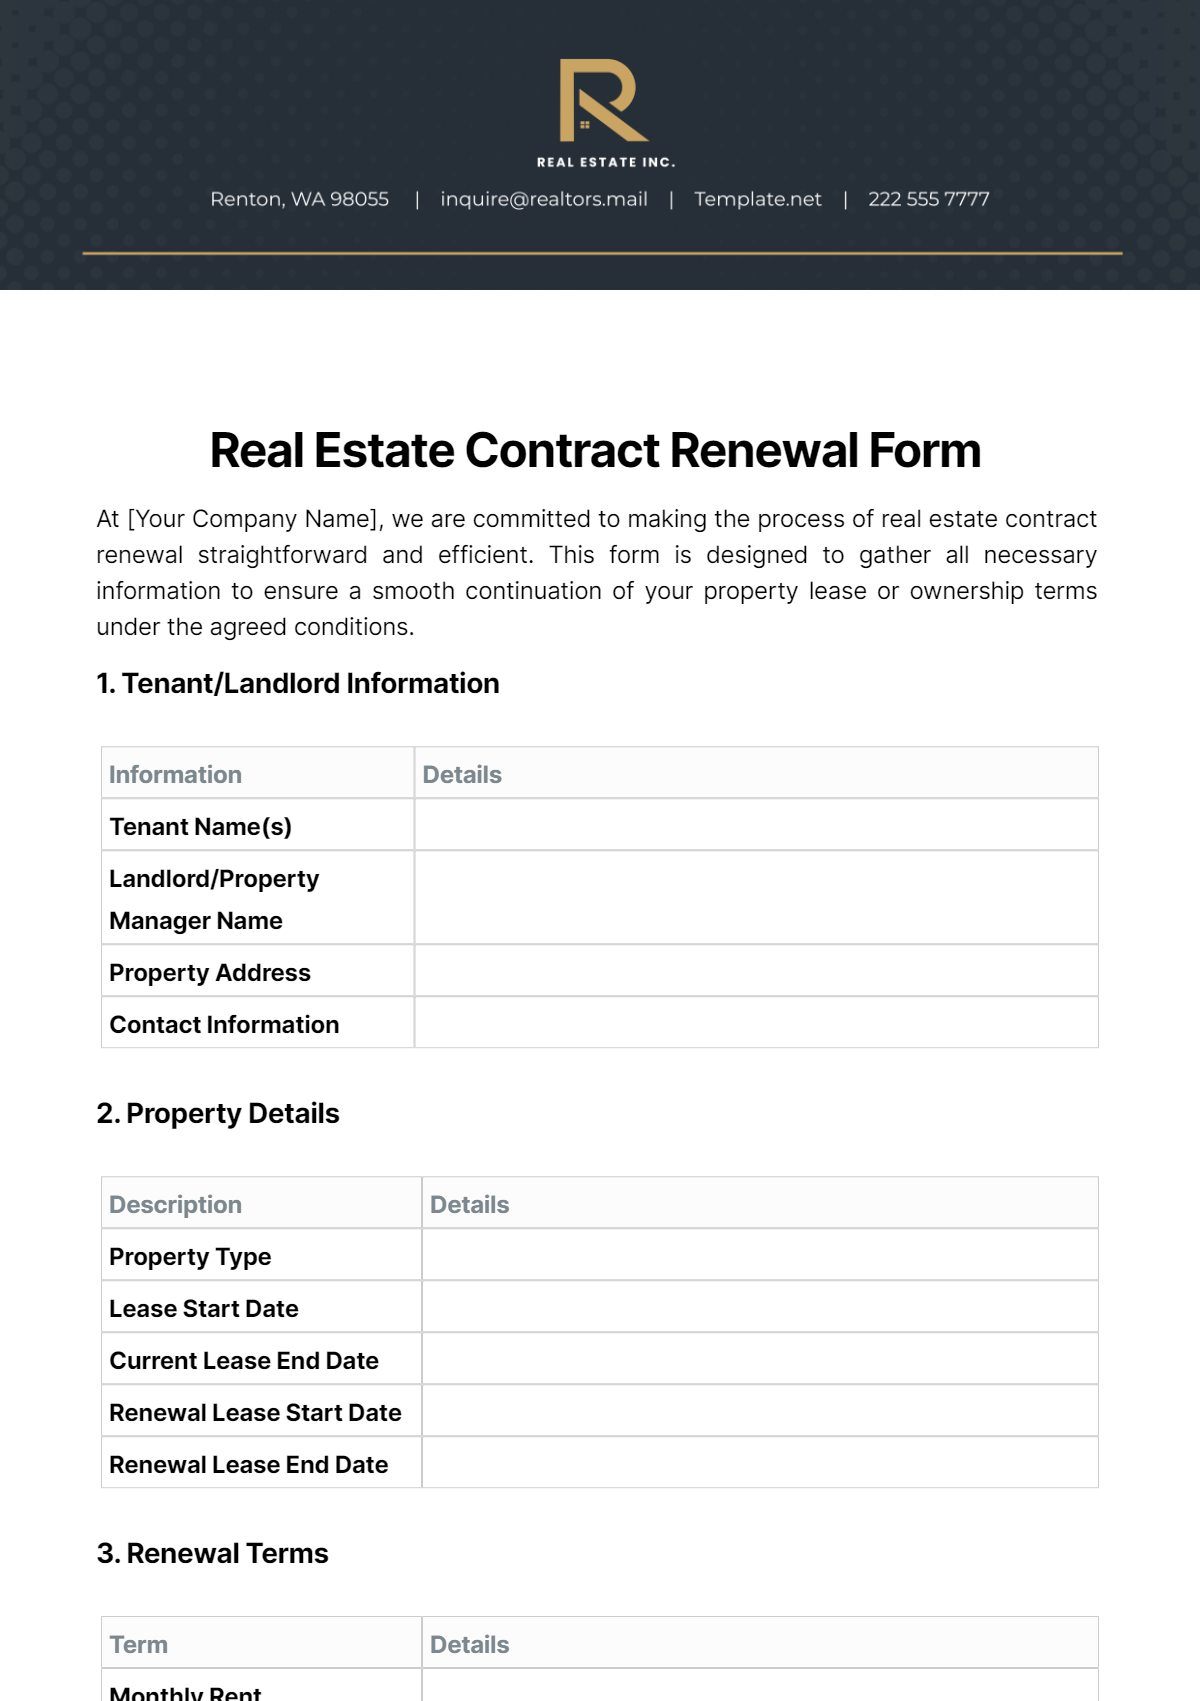 Real Estate Contract Renewal Form Template